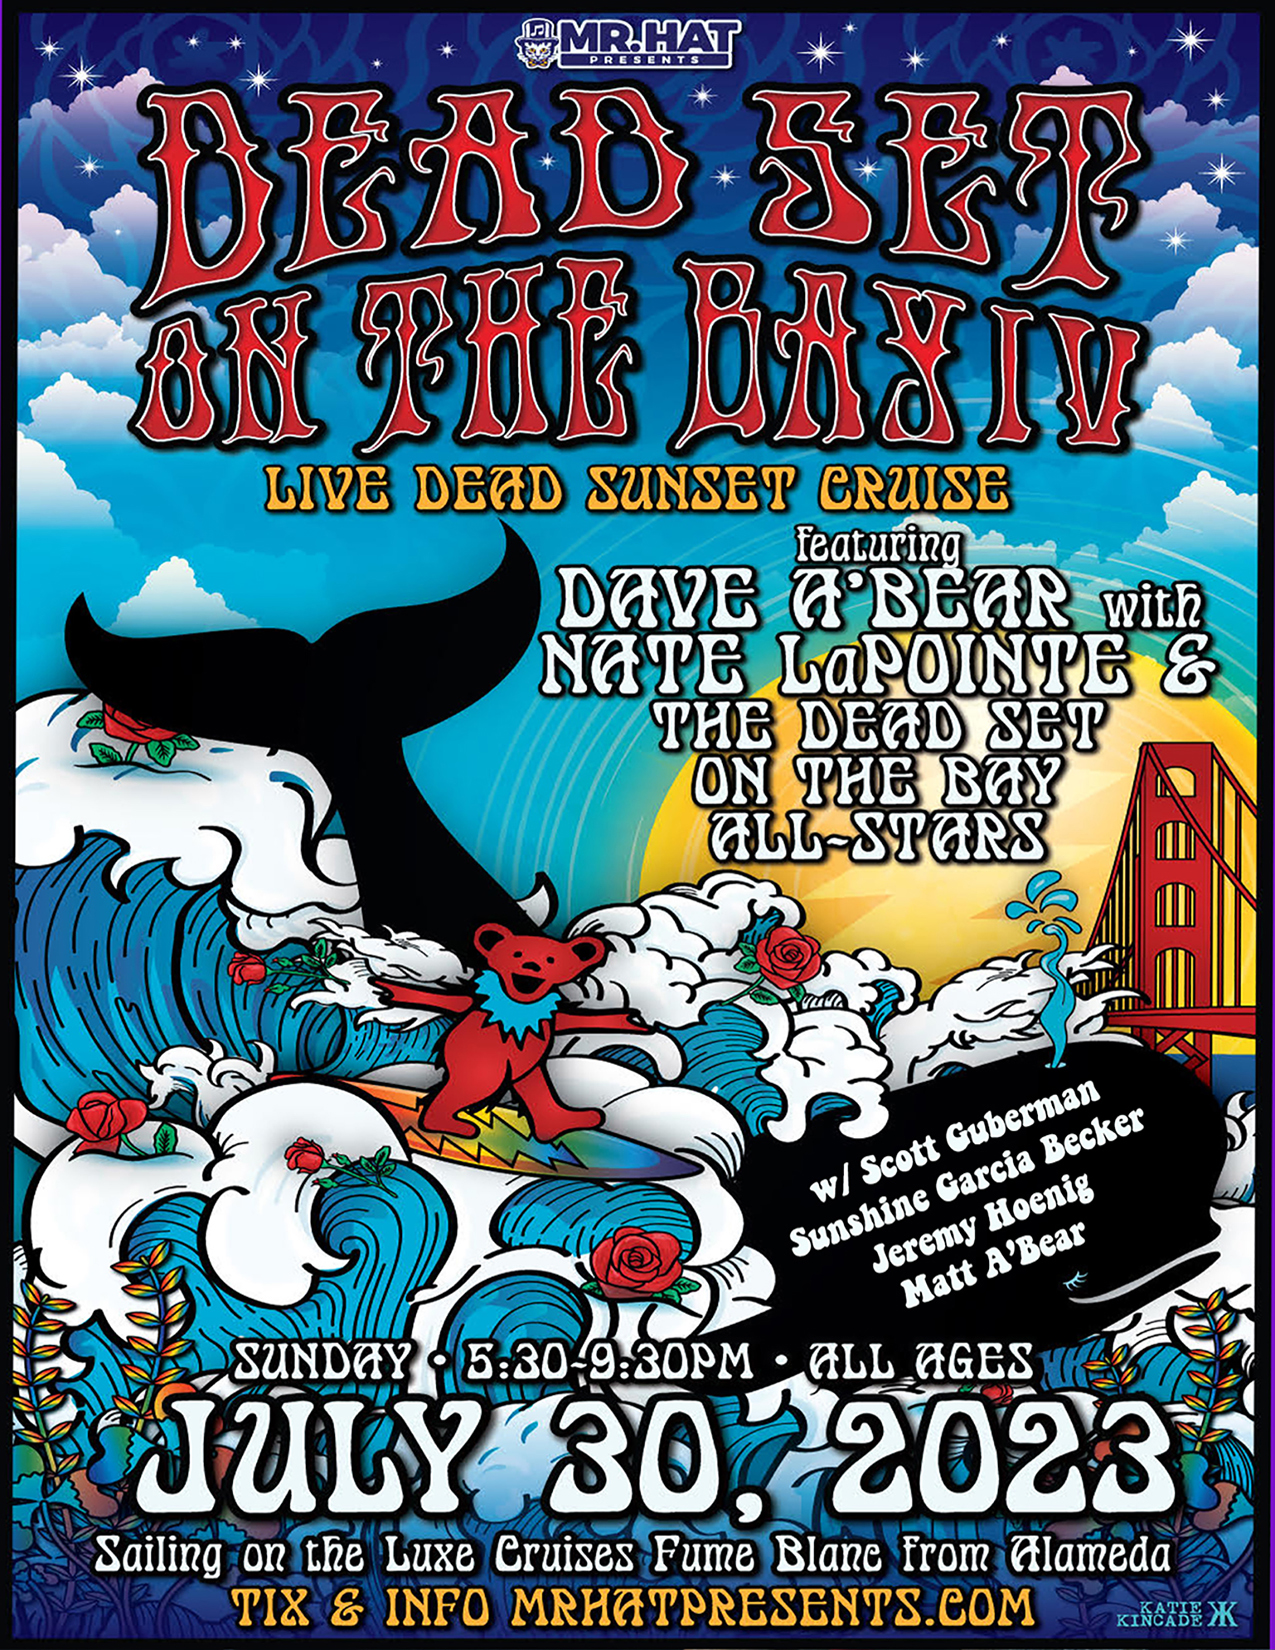 DEAD SET ON THE BAY IS BACK- THE ULTIMATE LIVE DEAD SUNSET CRUISE! SAILING SUNDAY JULY 30th from Alameda